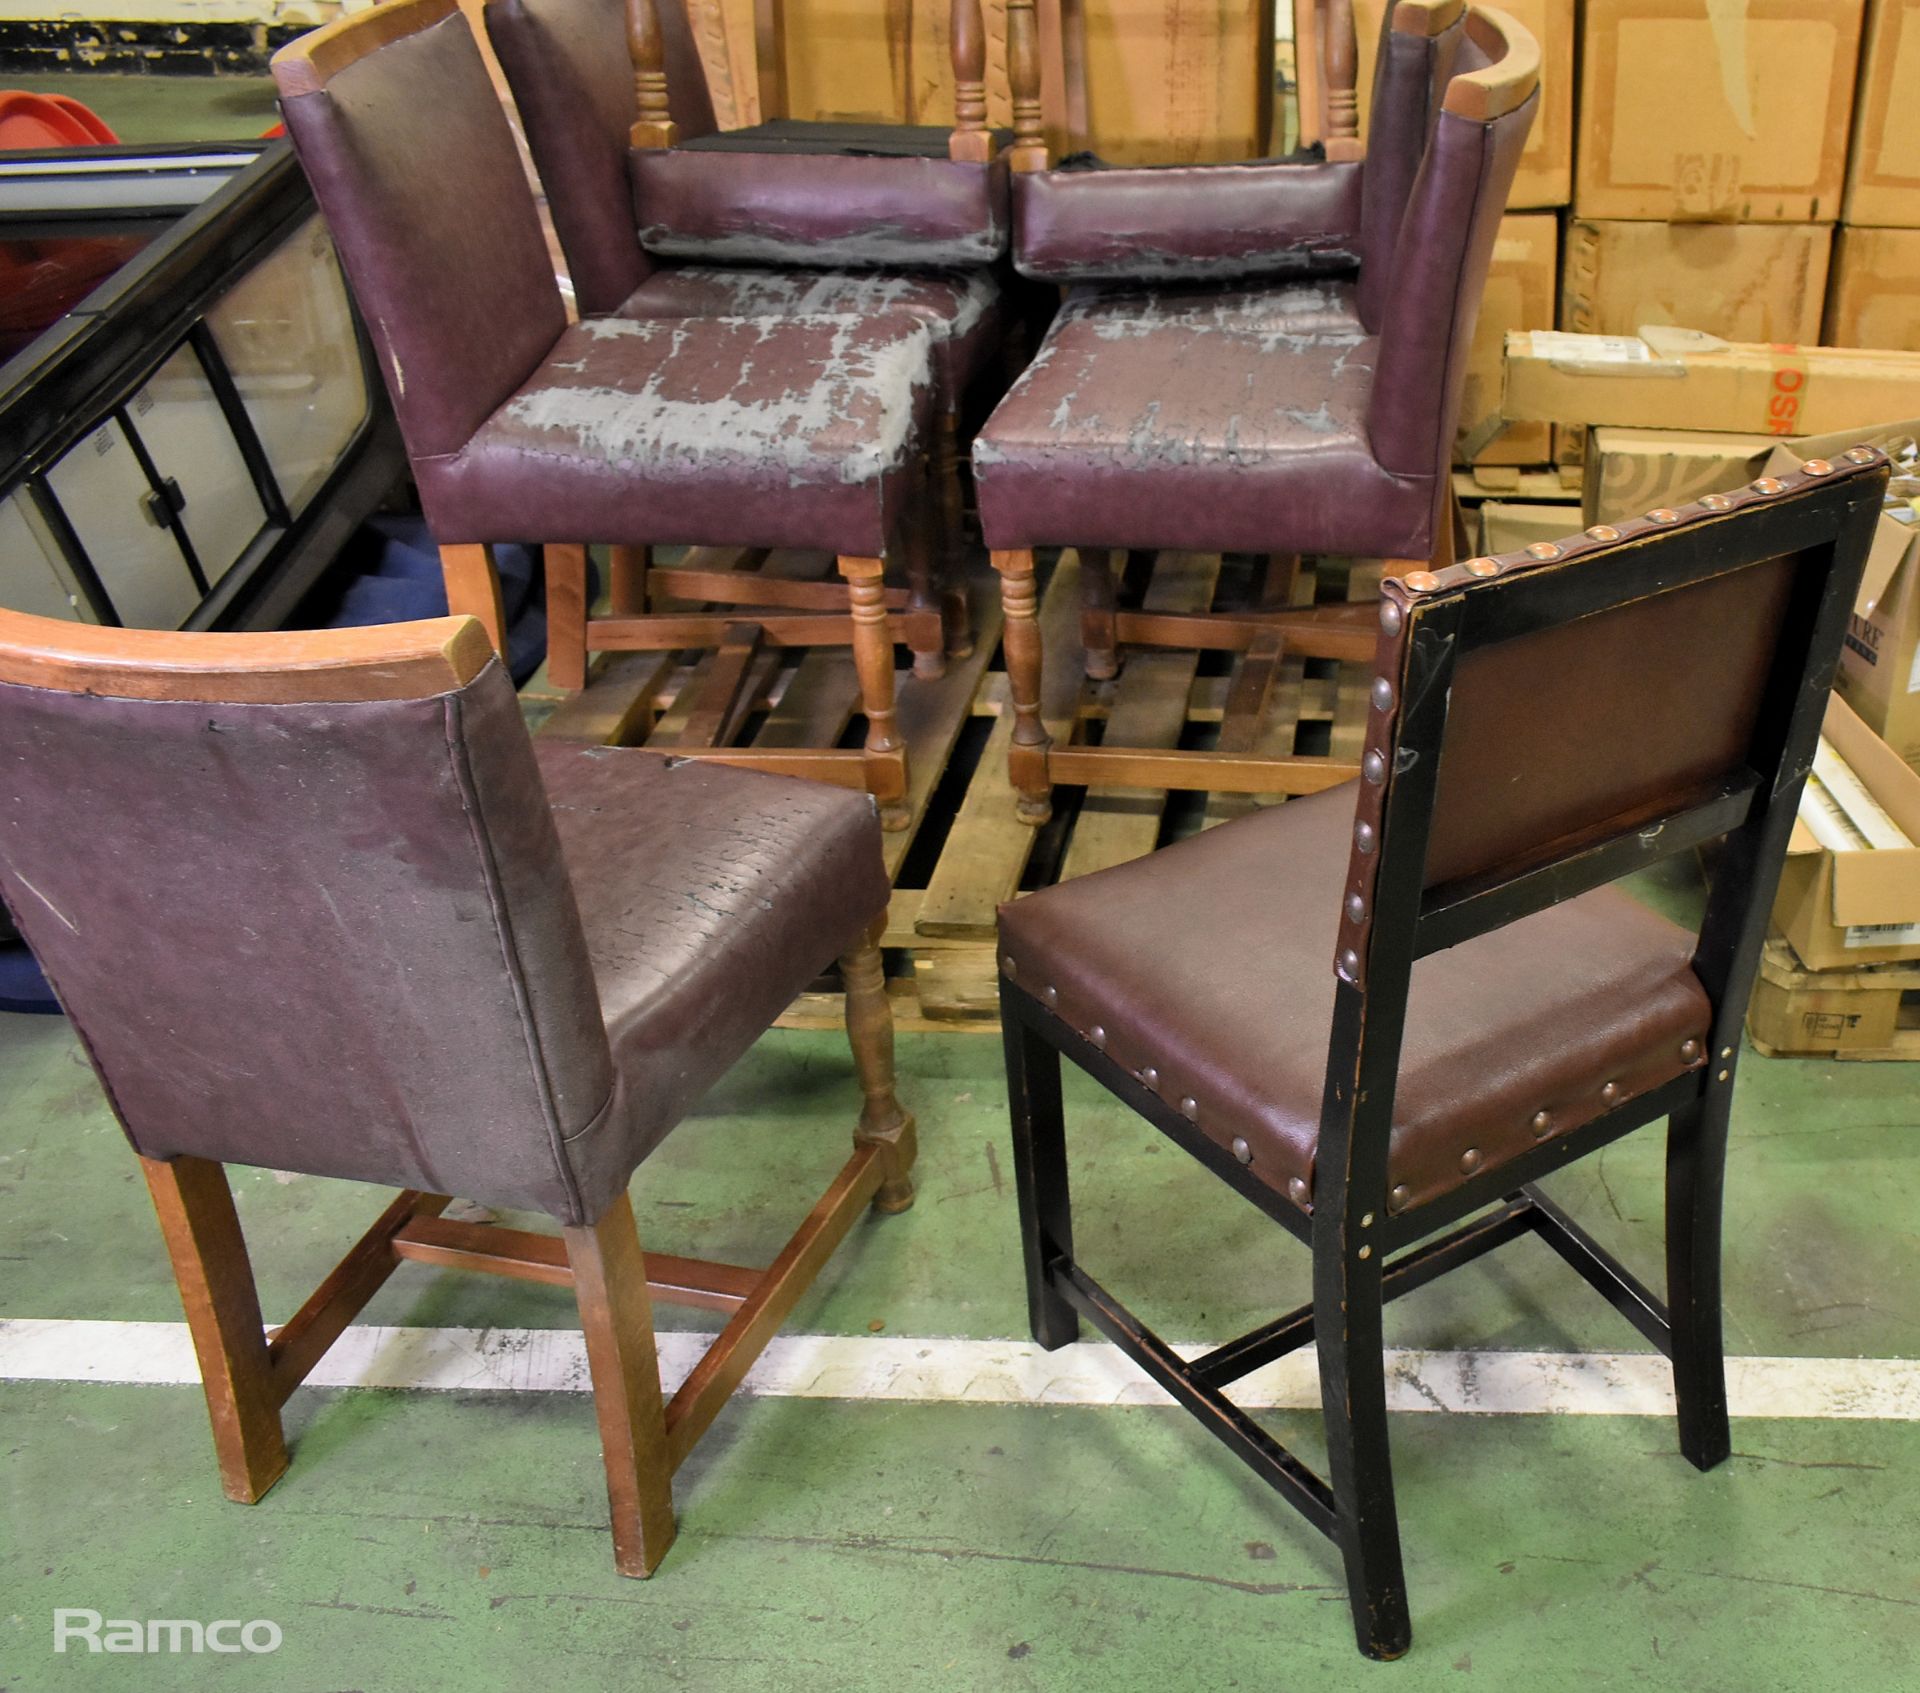 8x Leather wooden chairs - padding worn - Image 5 of 5